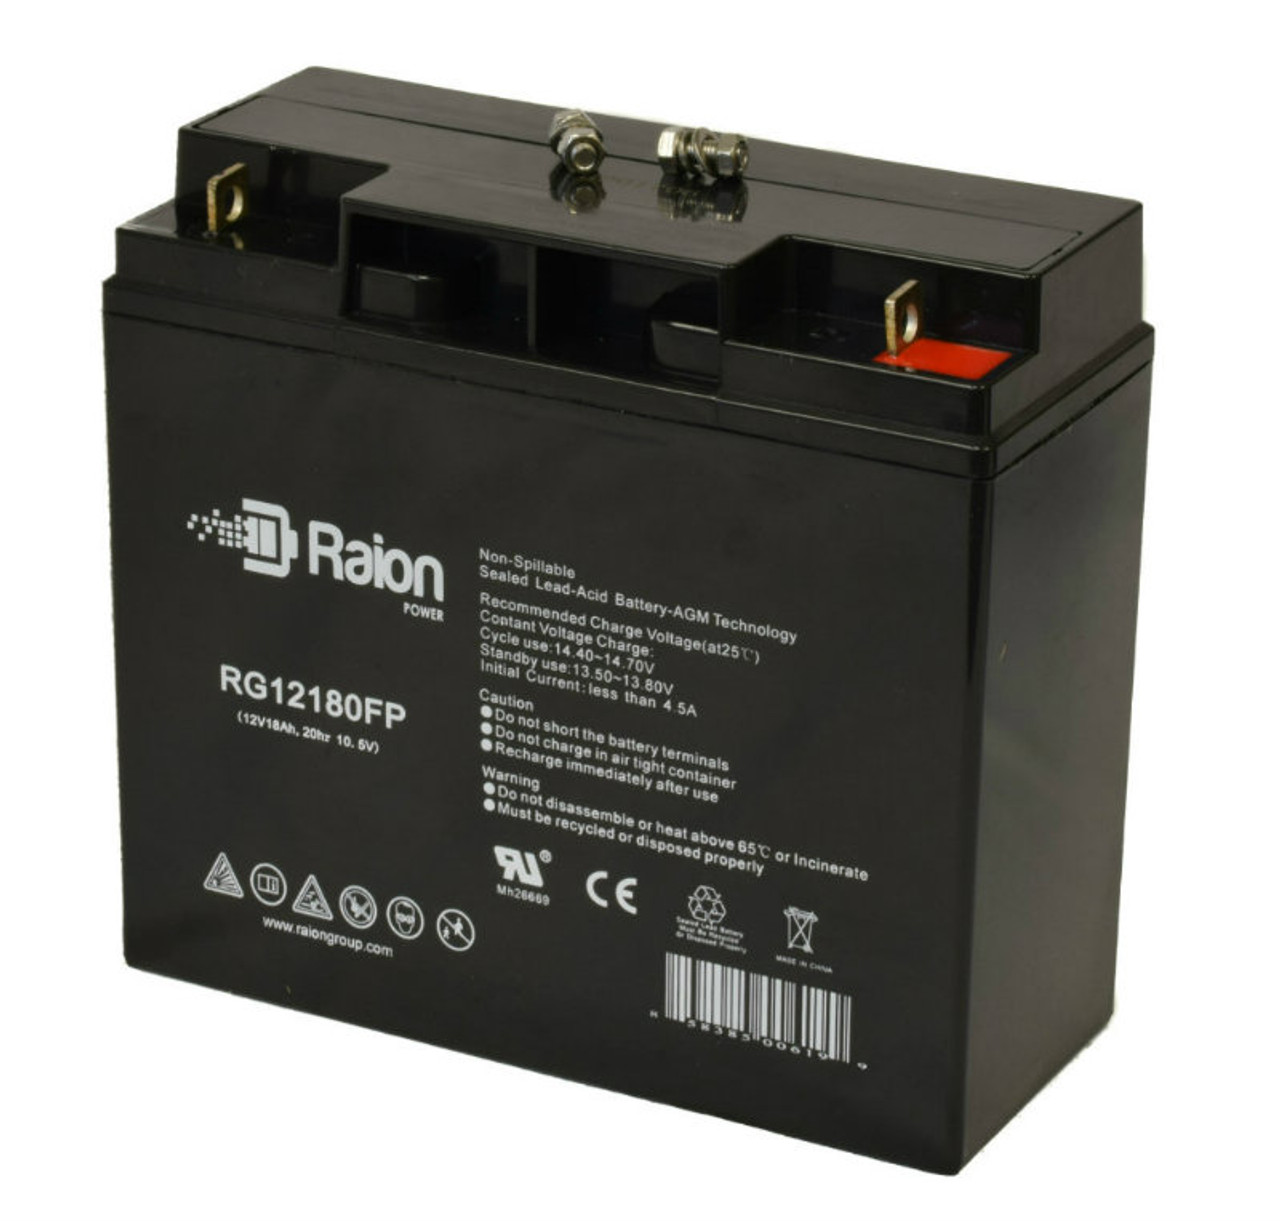 Raion Power Replacement 12V 18Ah Battery for GS Portalac PXL12180 - 1 Pack